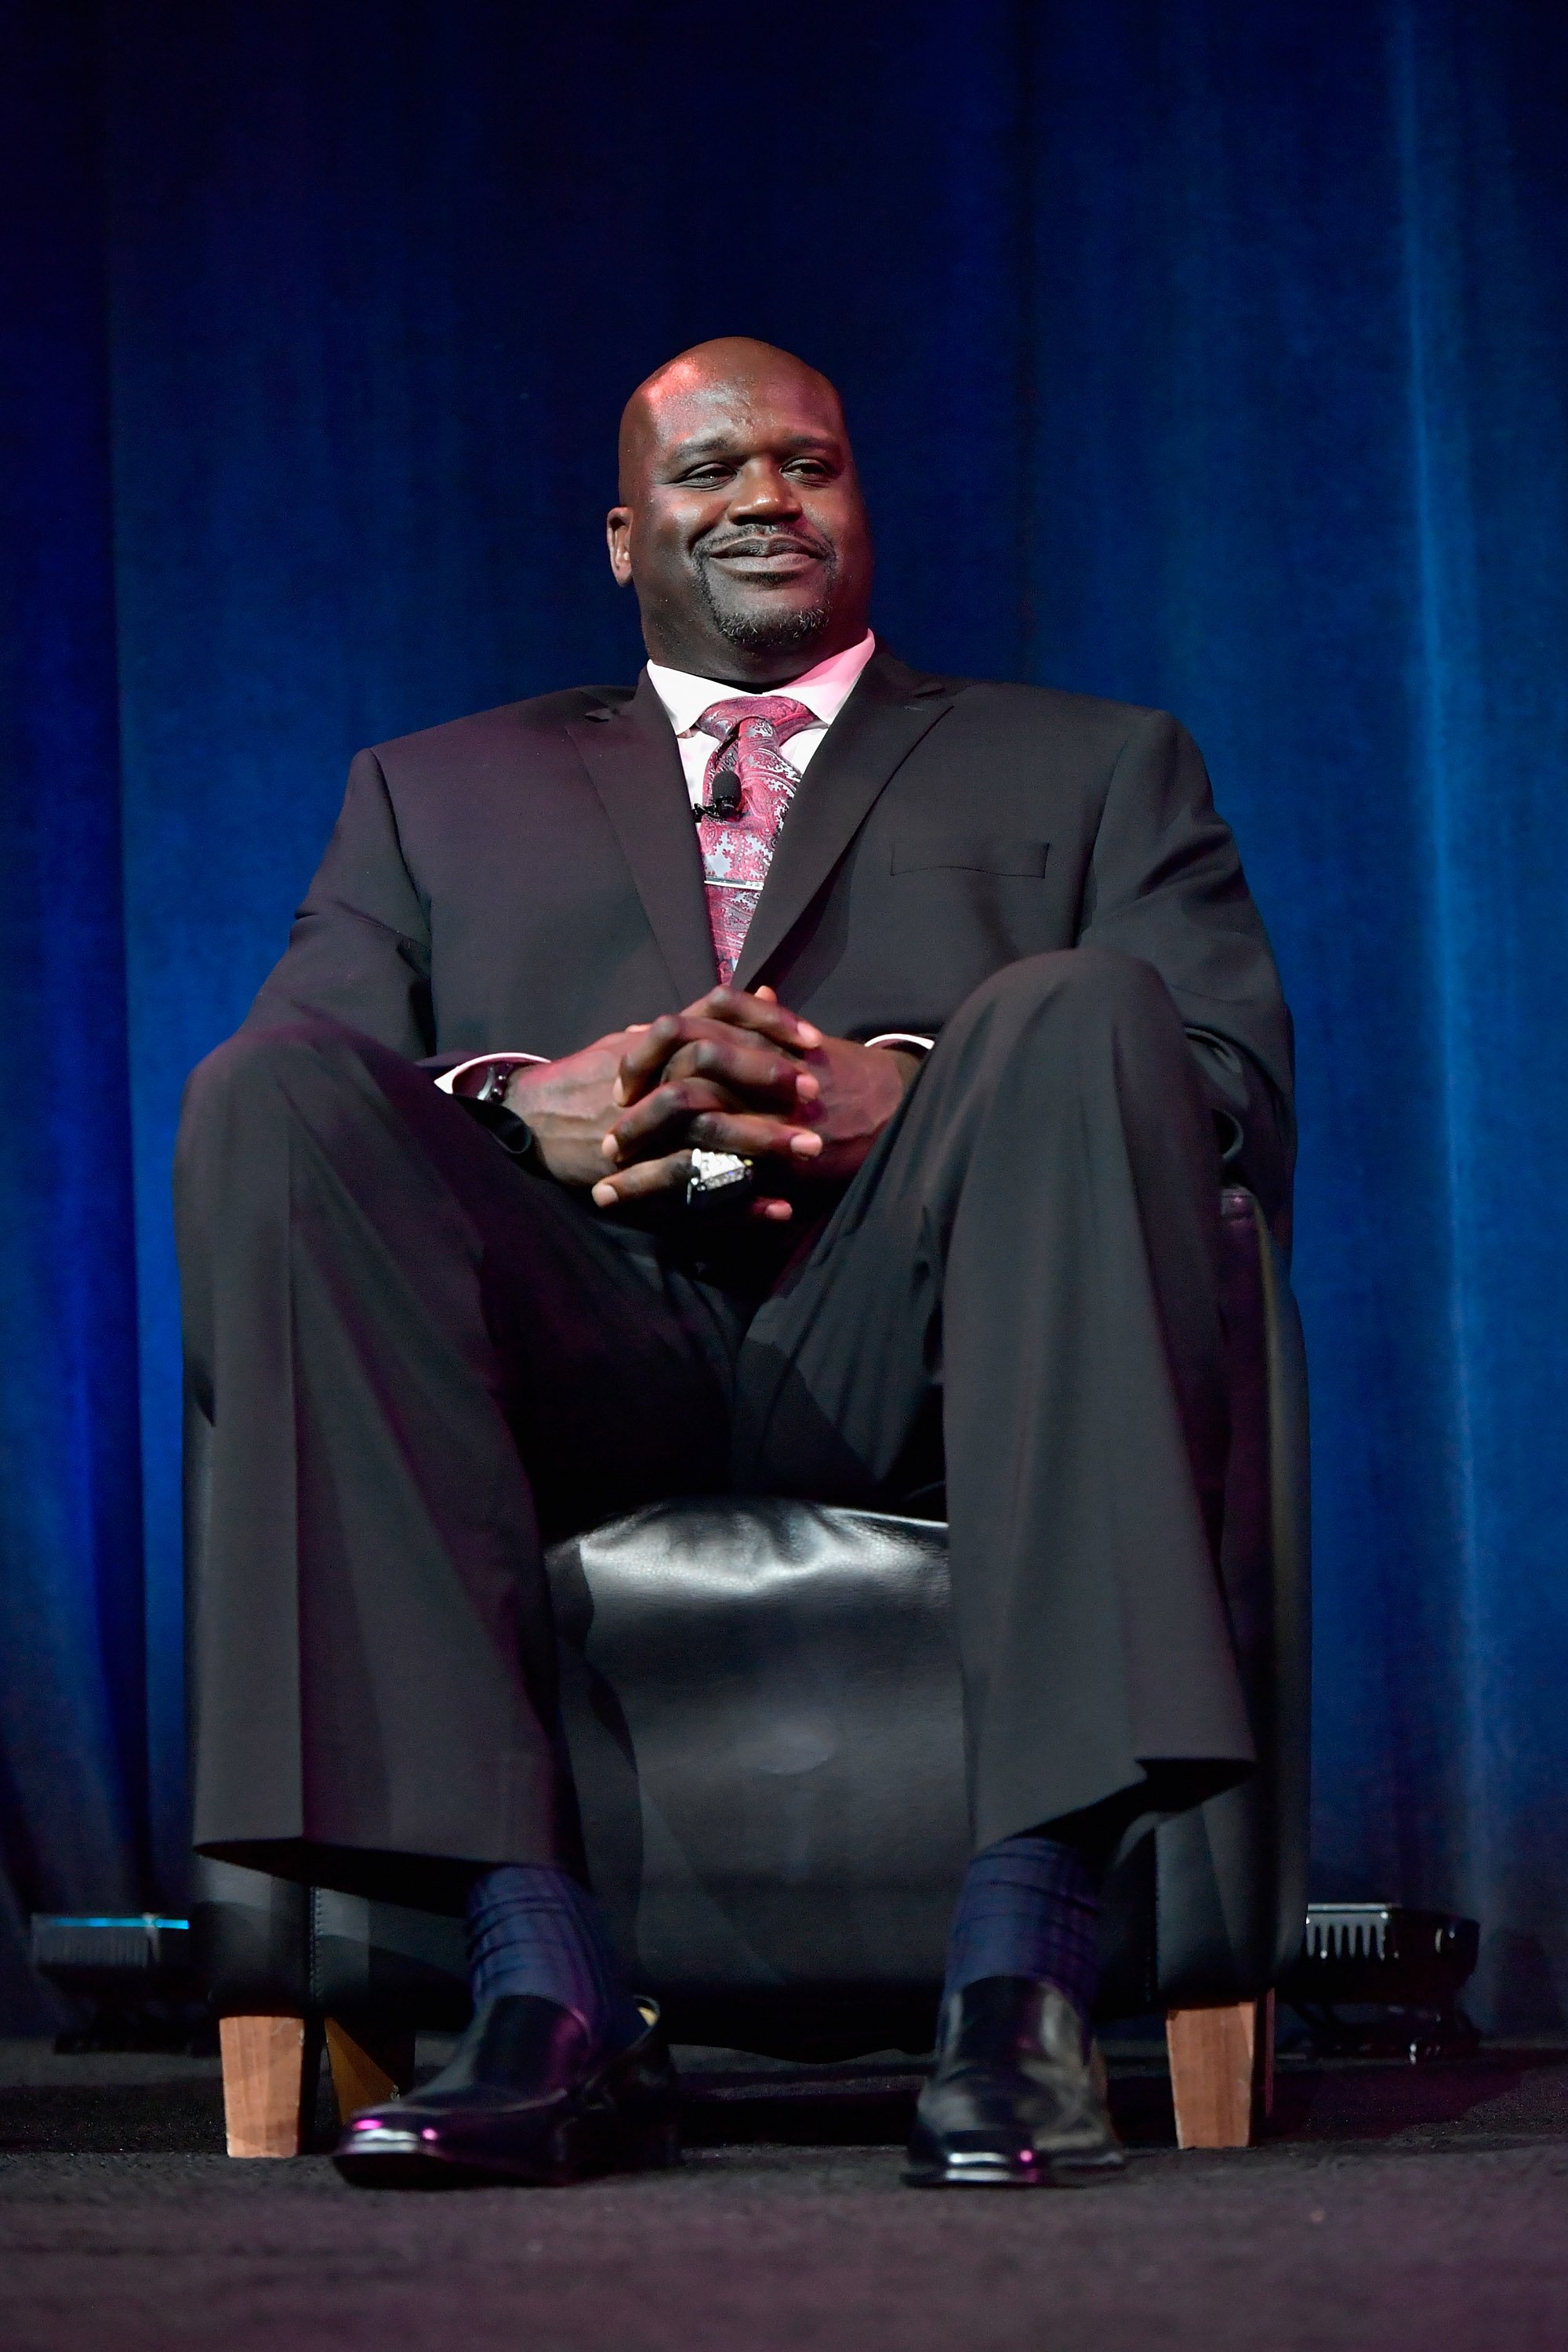 Shaquille O'Neal on November 29, 2016 in Boston, Massachusetts | Photo: Getty Images